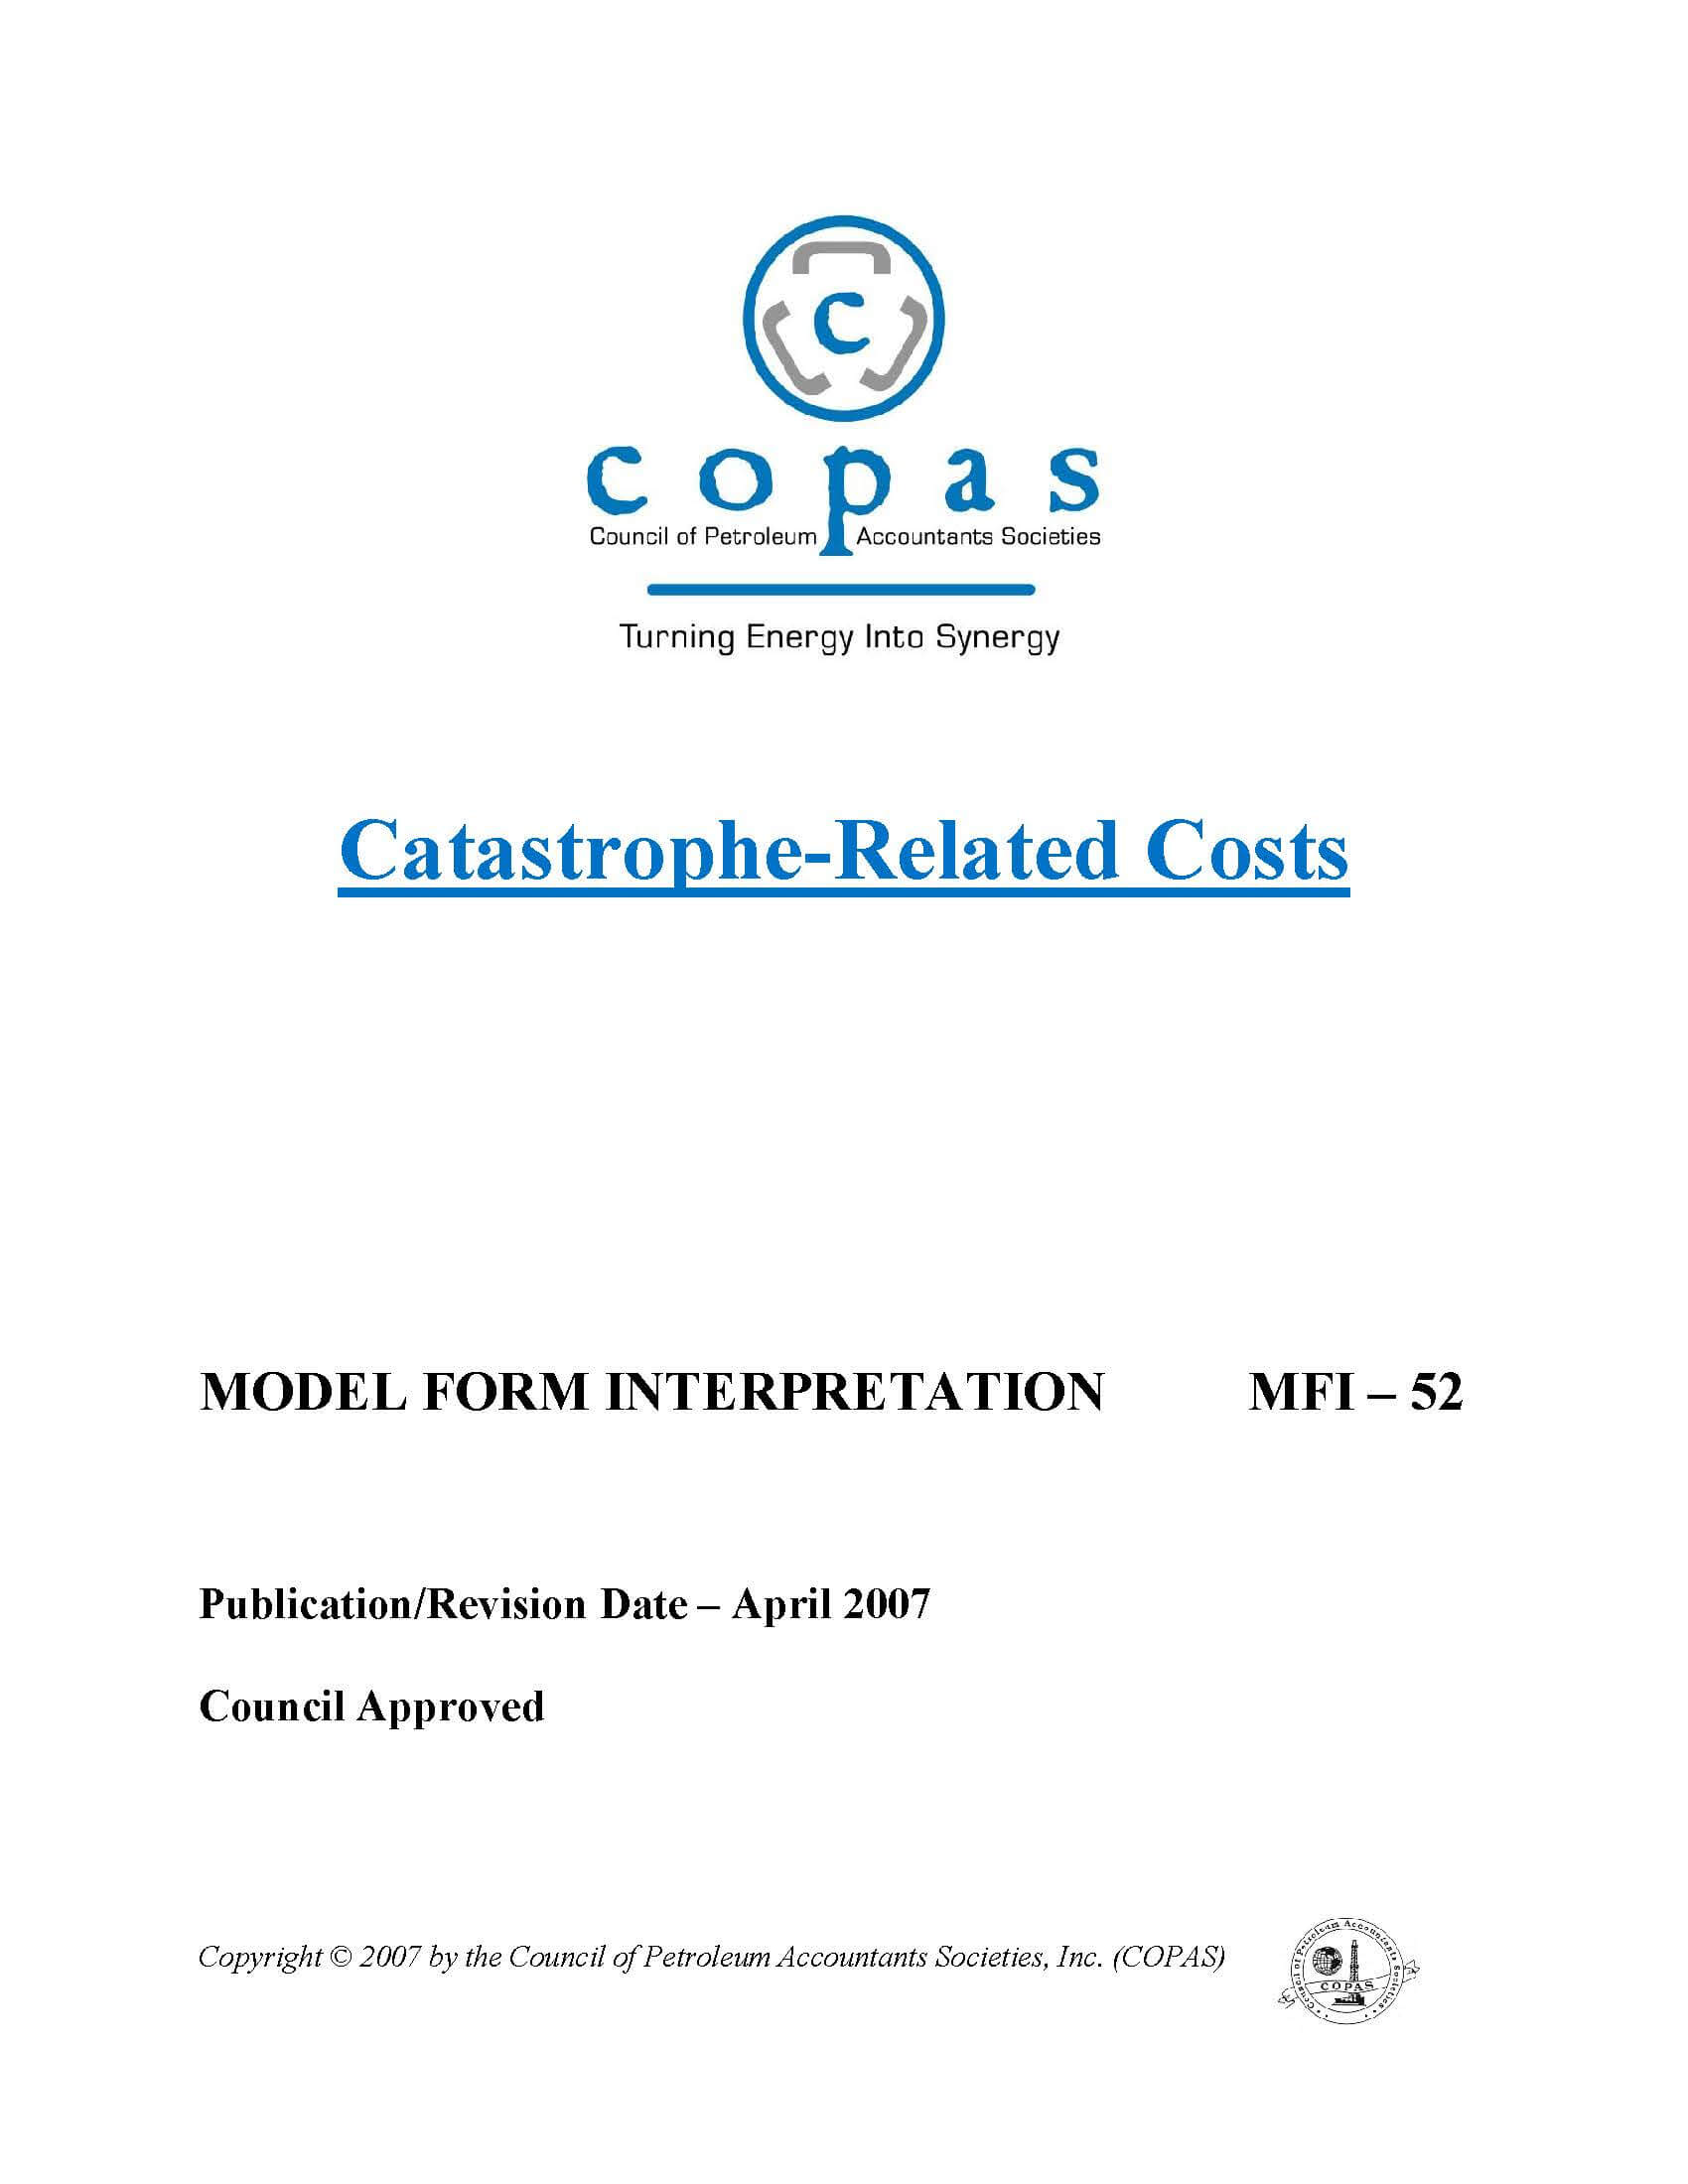 MFI-52 Catastrophe-Related Costs